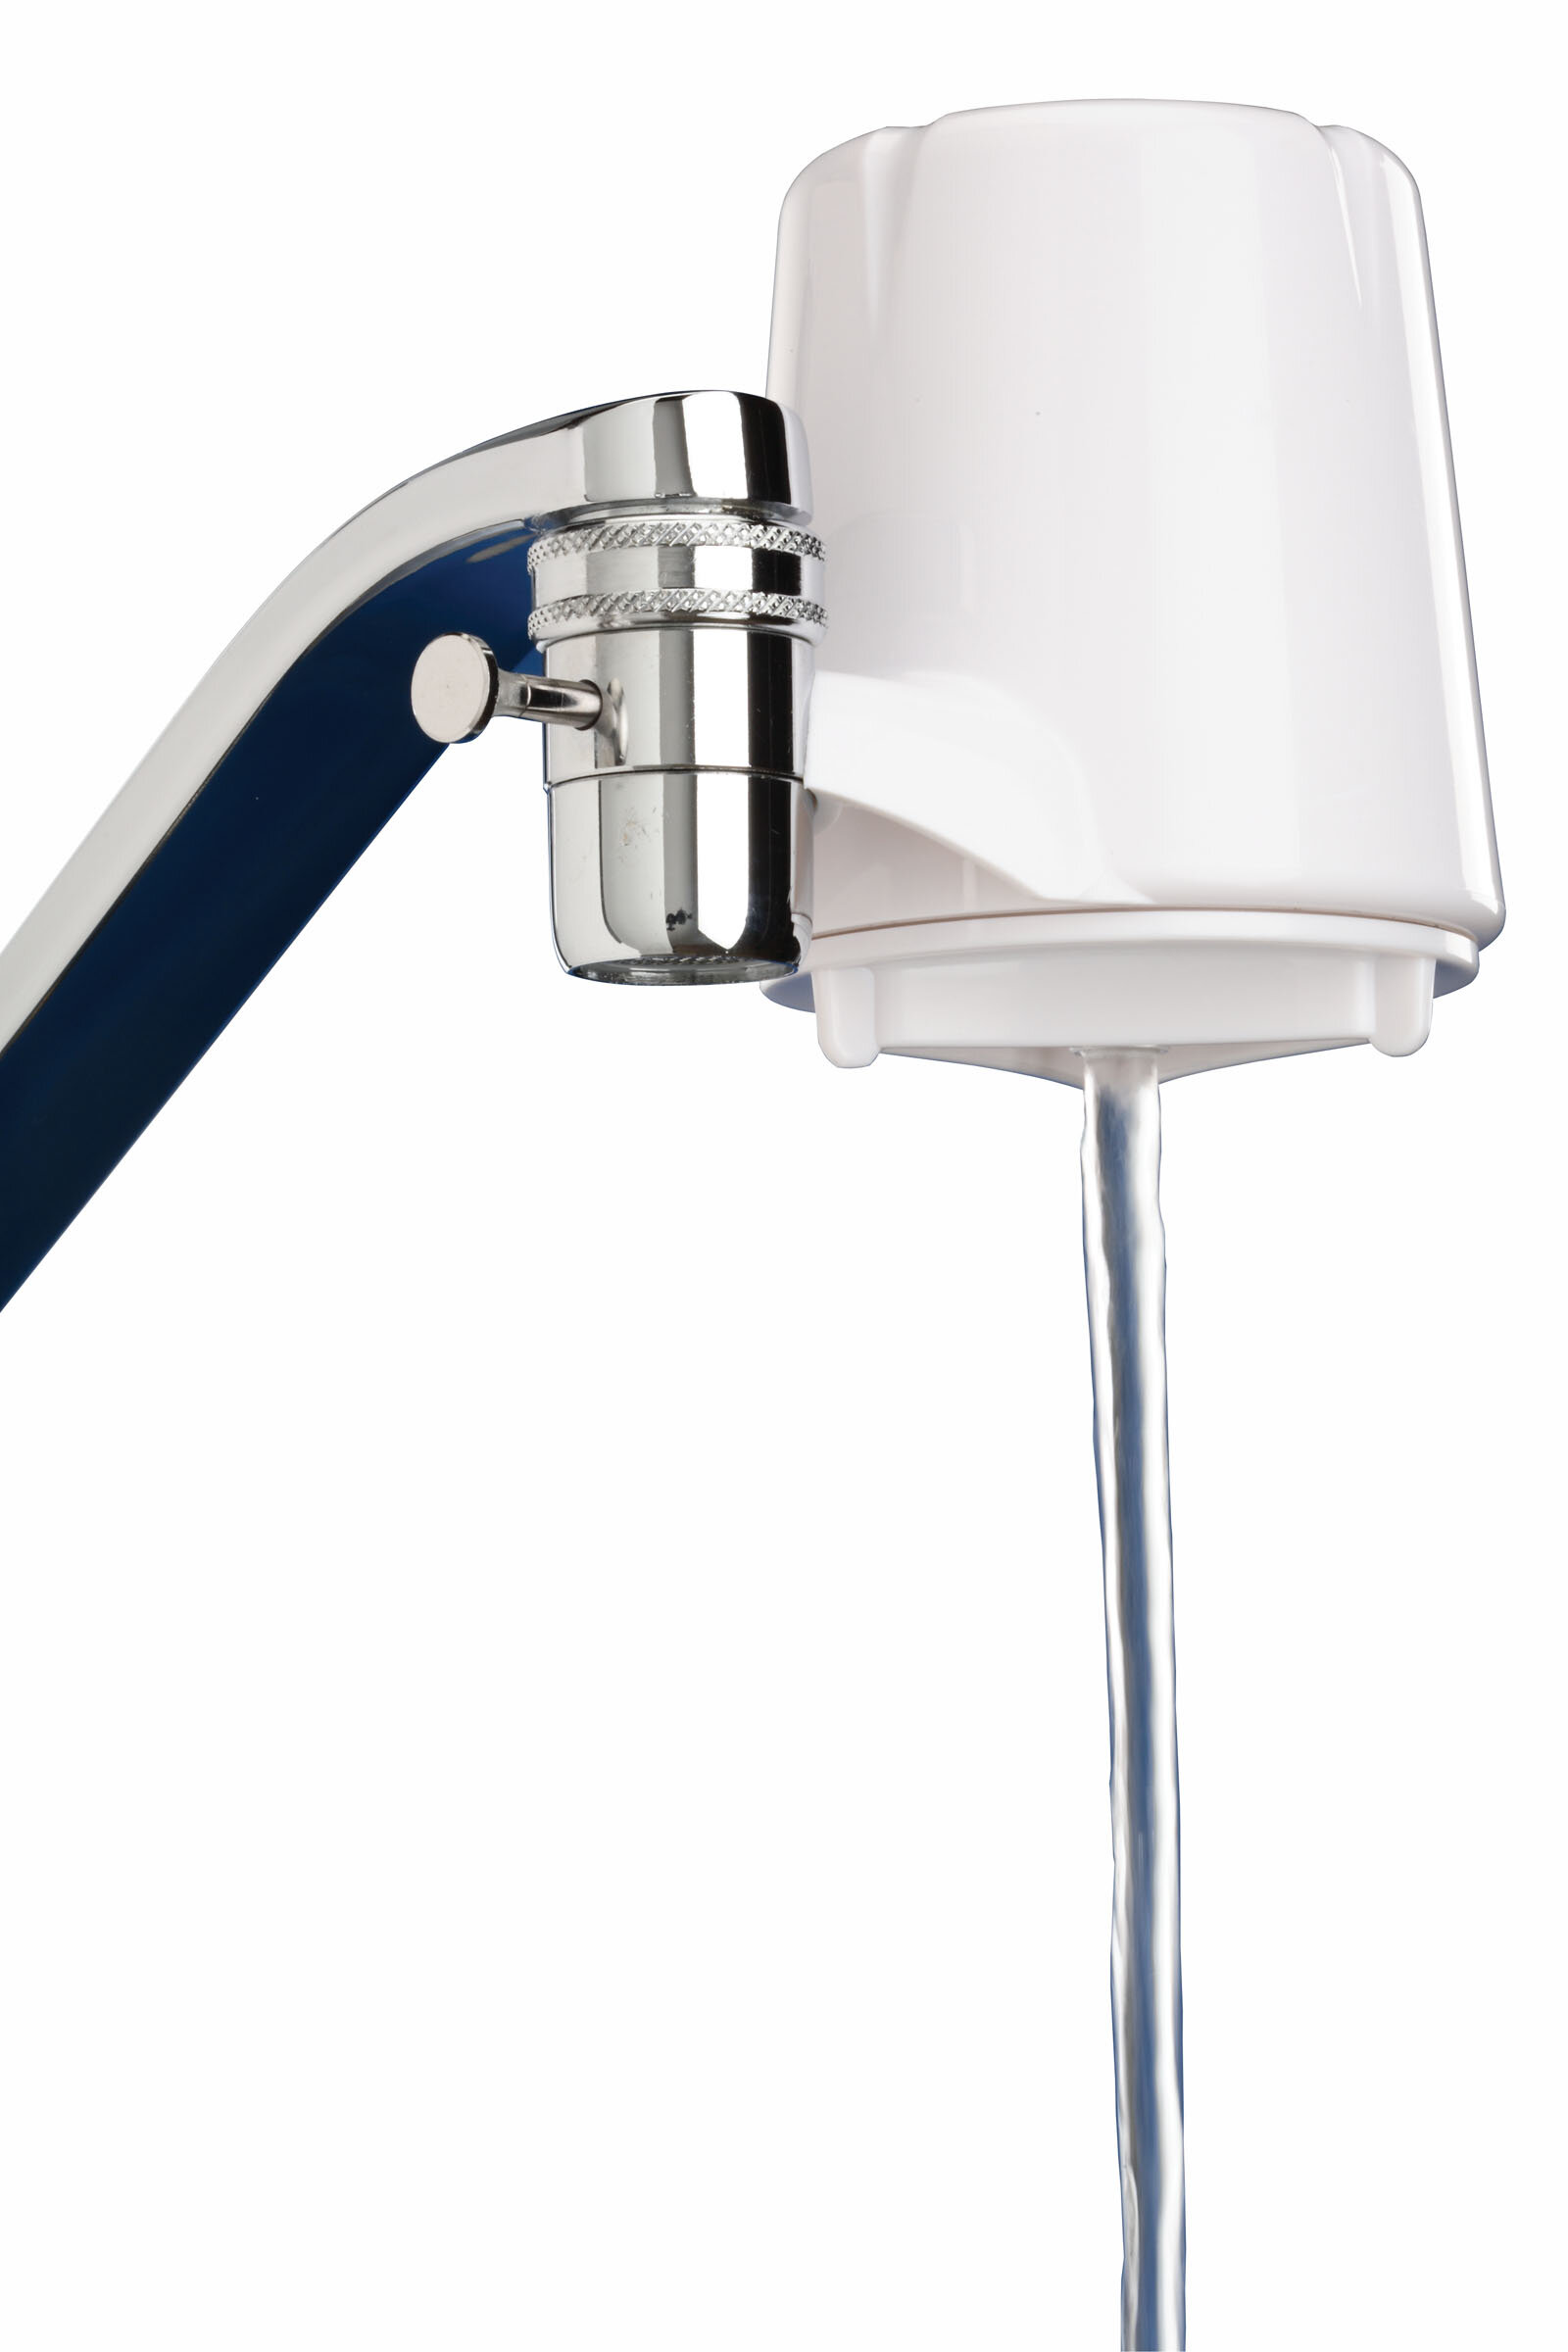 Culligan Level 3 Faucet Mount Drinking Water Filter Reviews